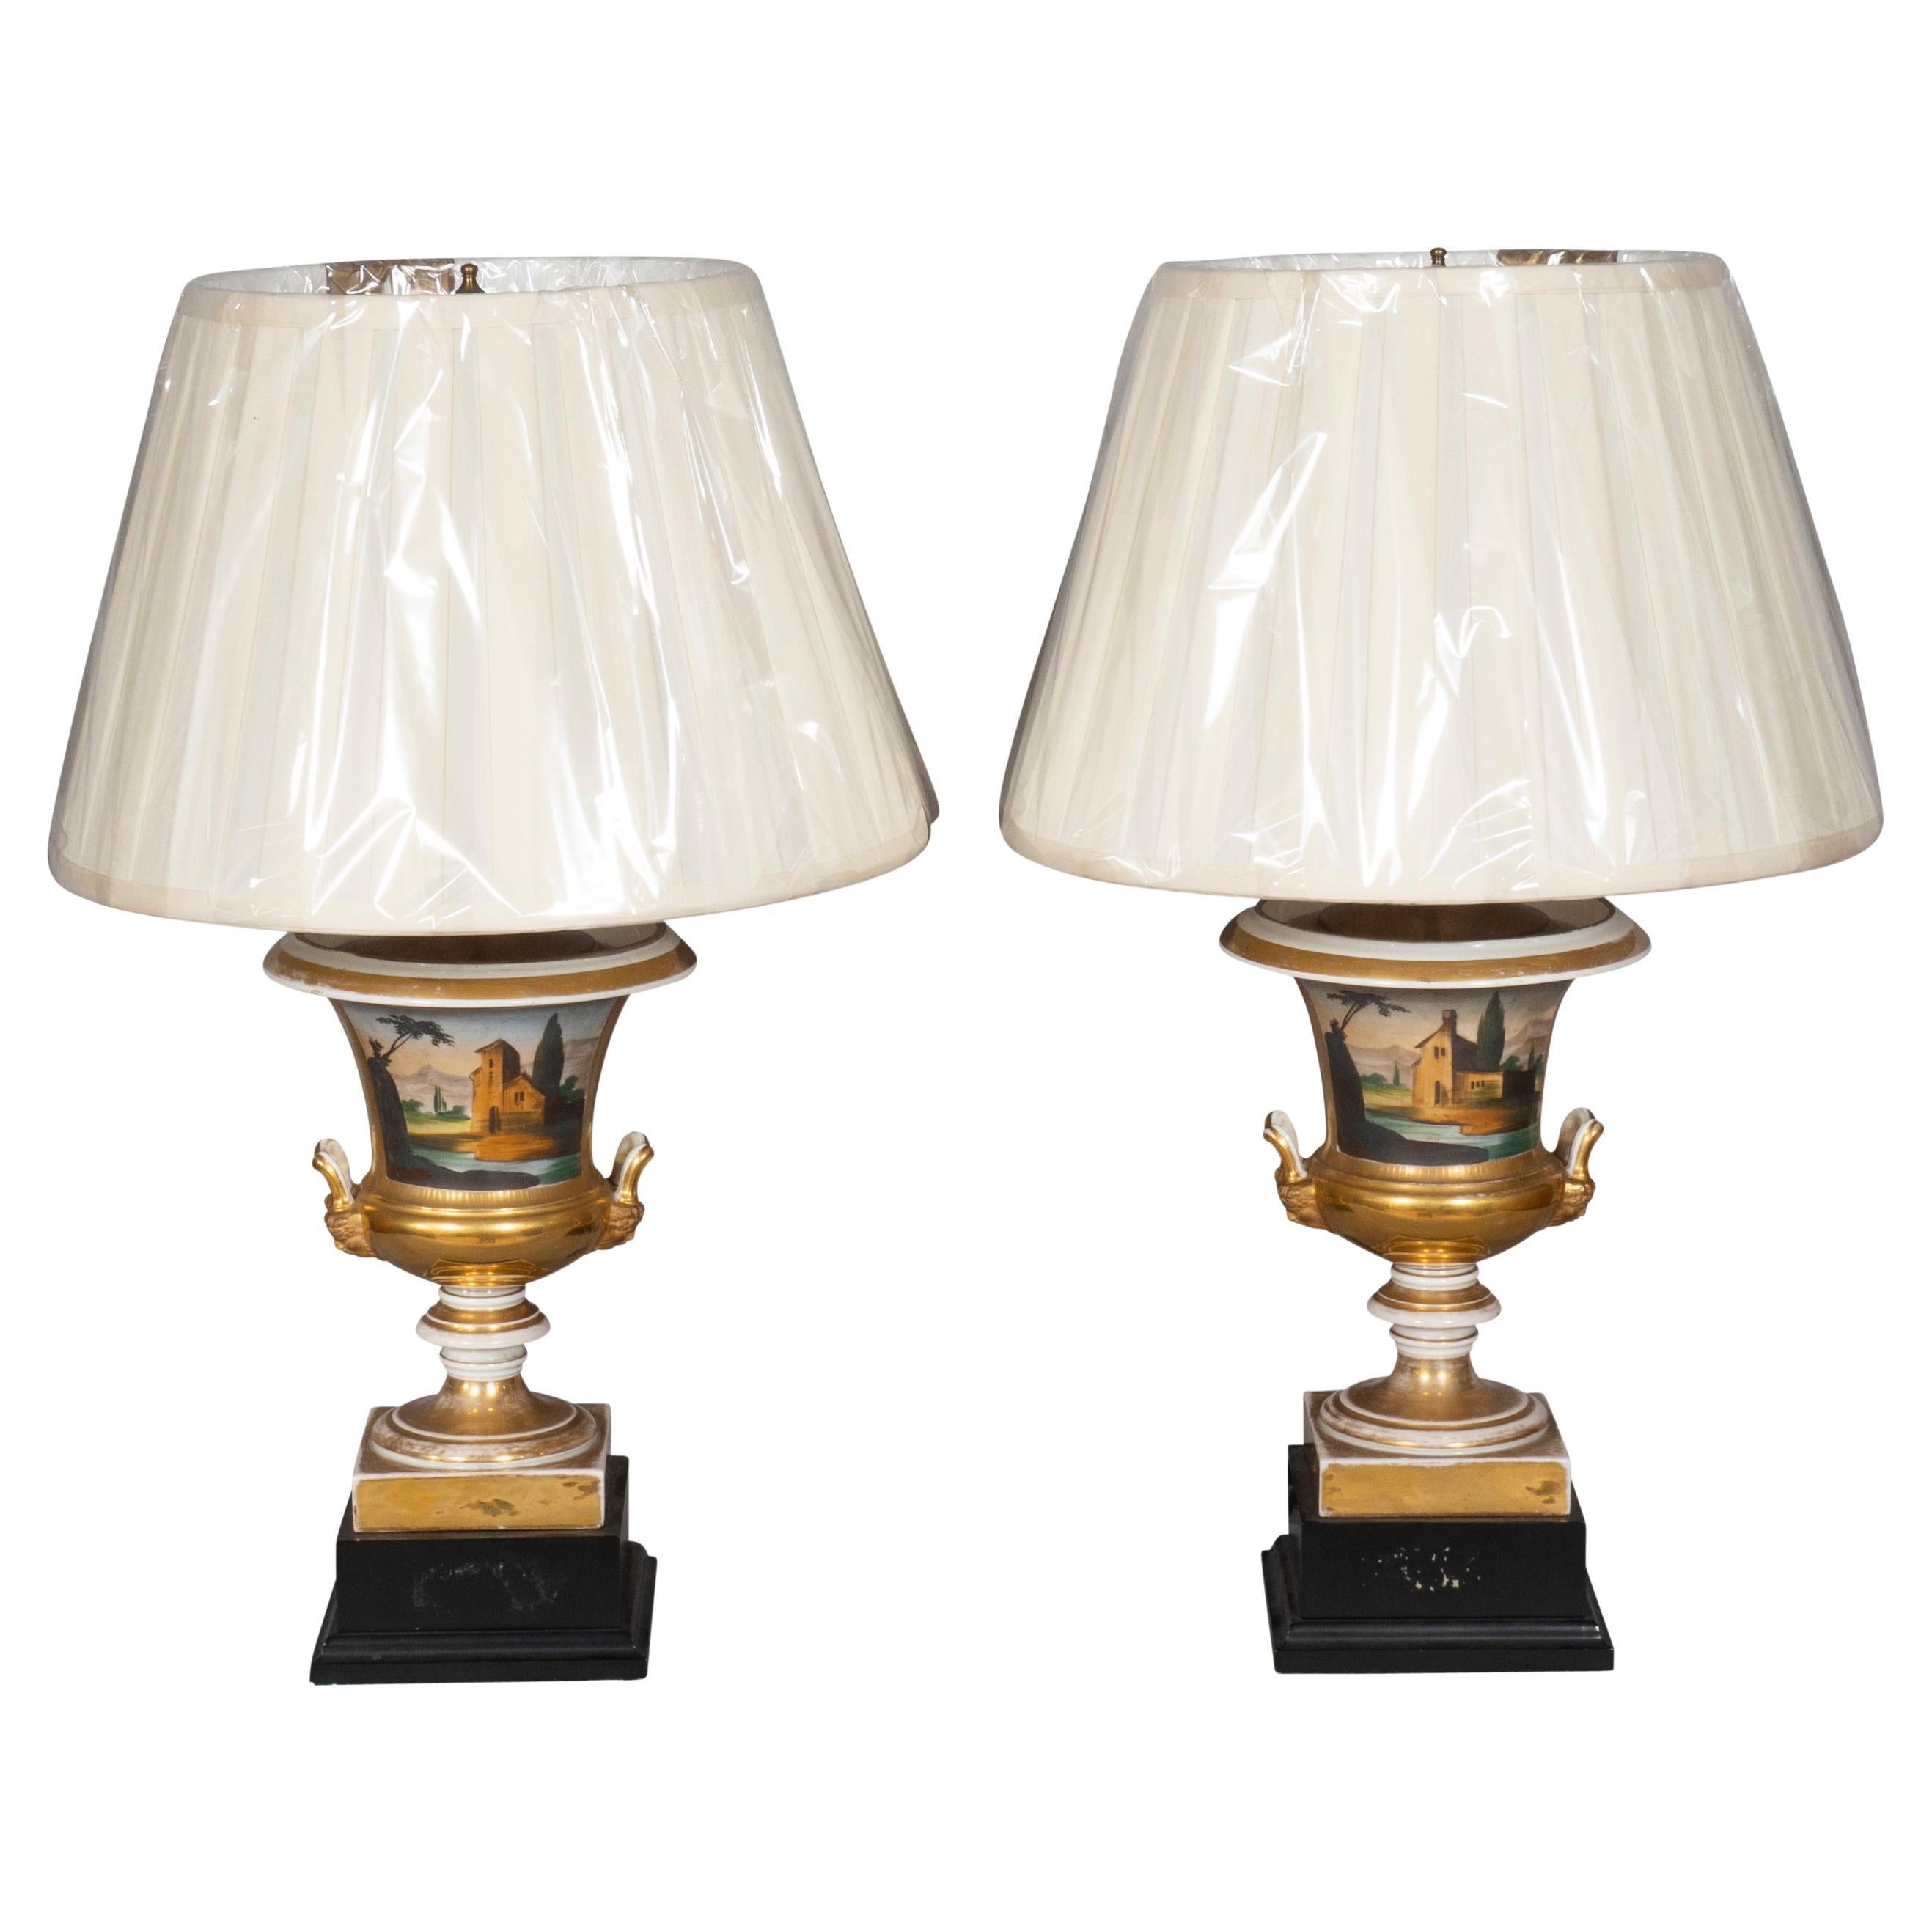 Pair of Paris Porcelain Campagna Form Table Lamps with New Shades